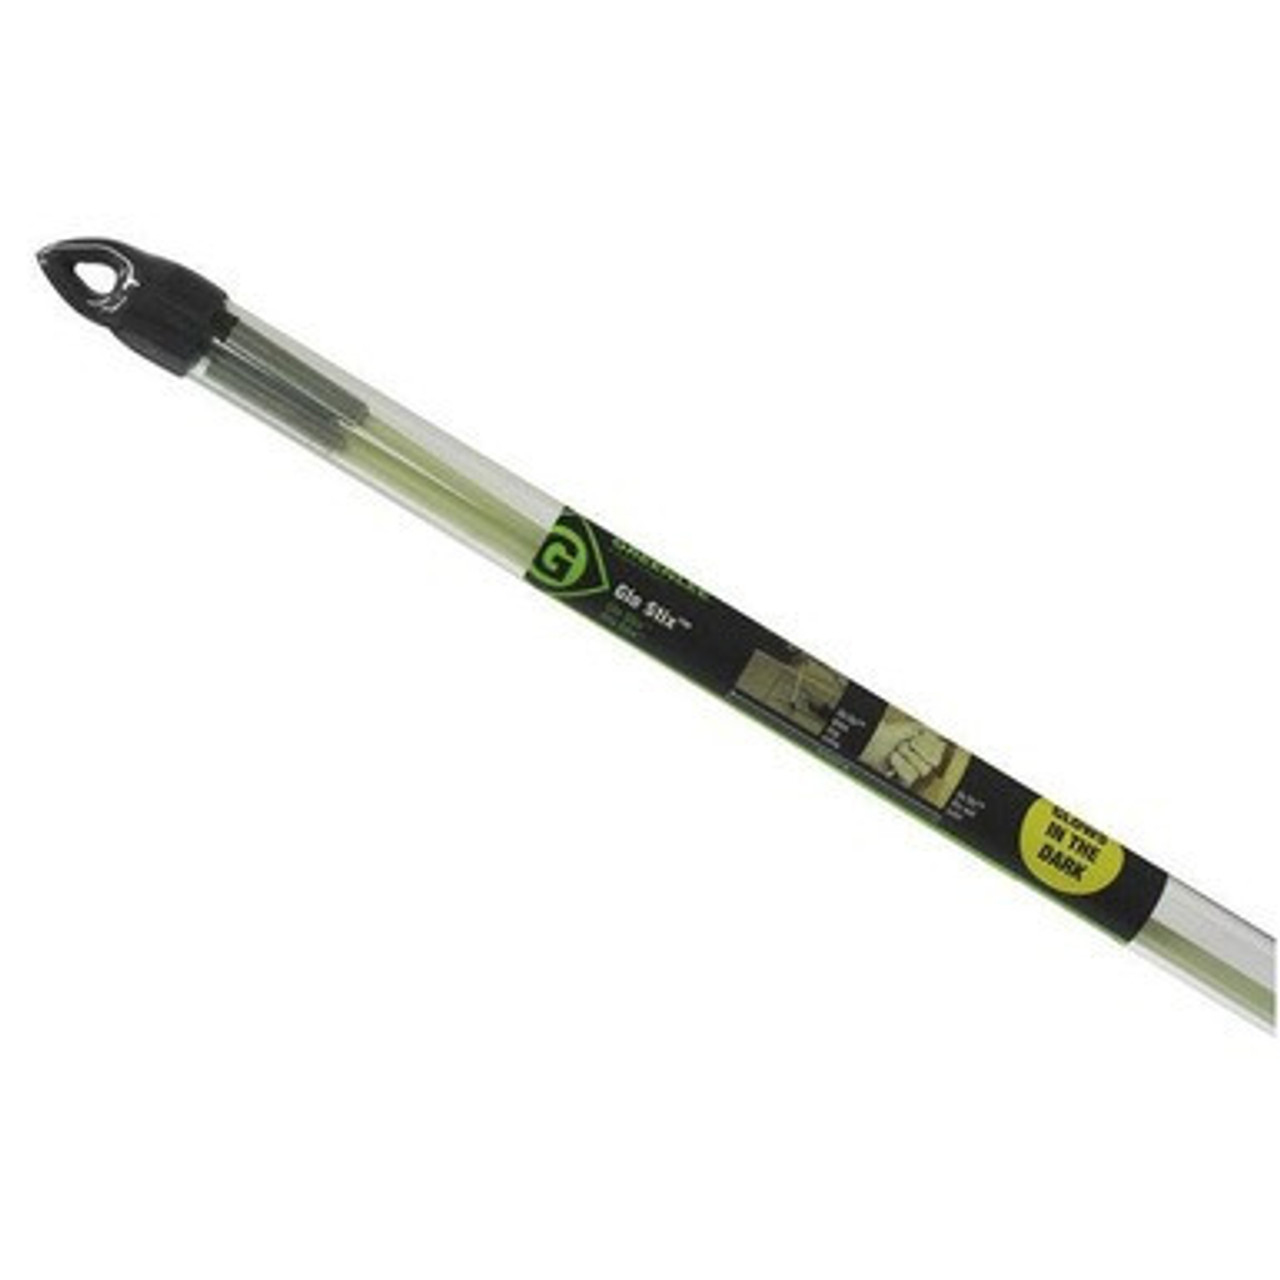 Certified USA Made Glow in the Dark Pen Click Pens